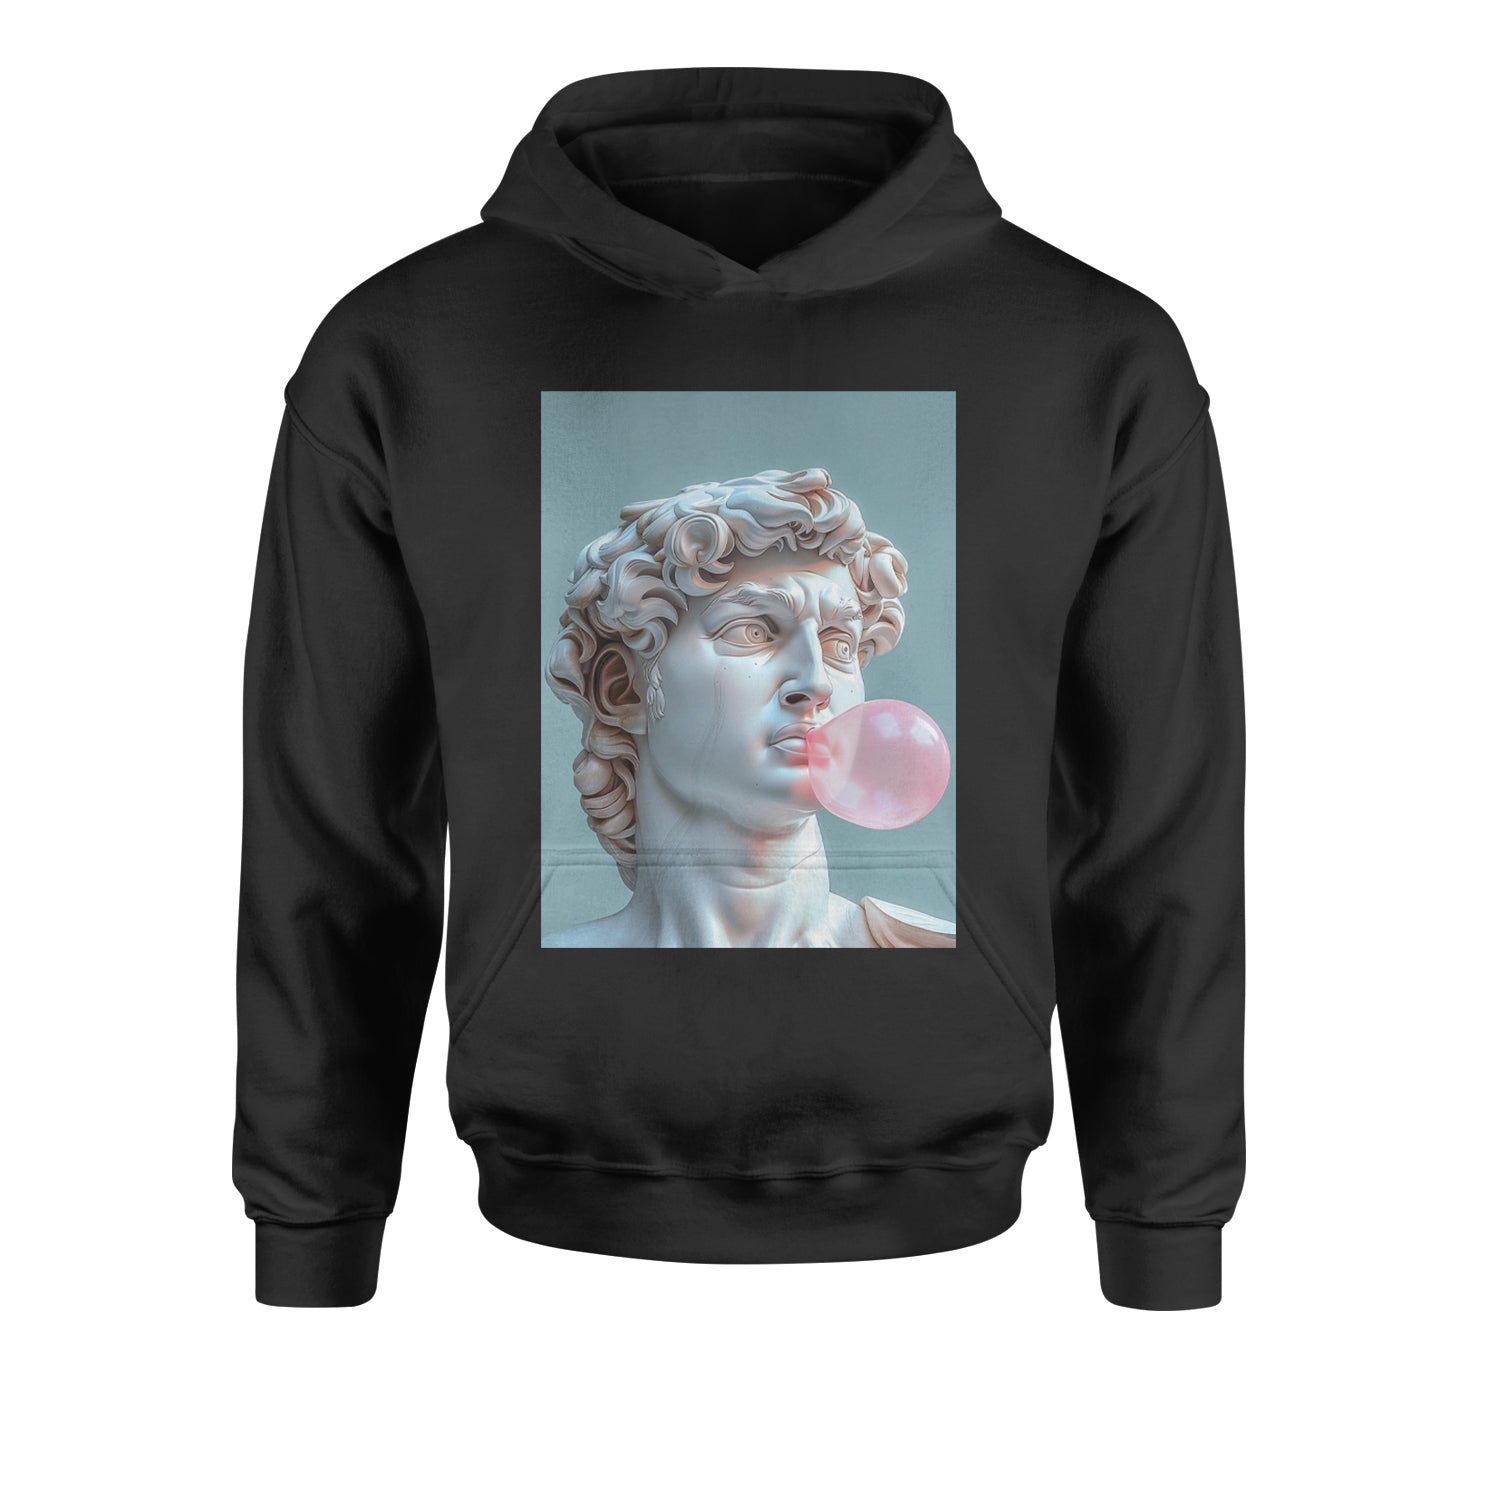 Michelangelo's David with Bubble Gum Contemporary Statue Art Youth-Sized Hoodie